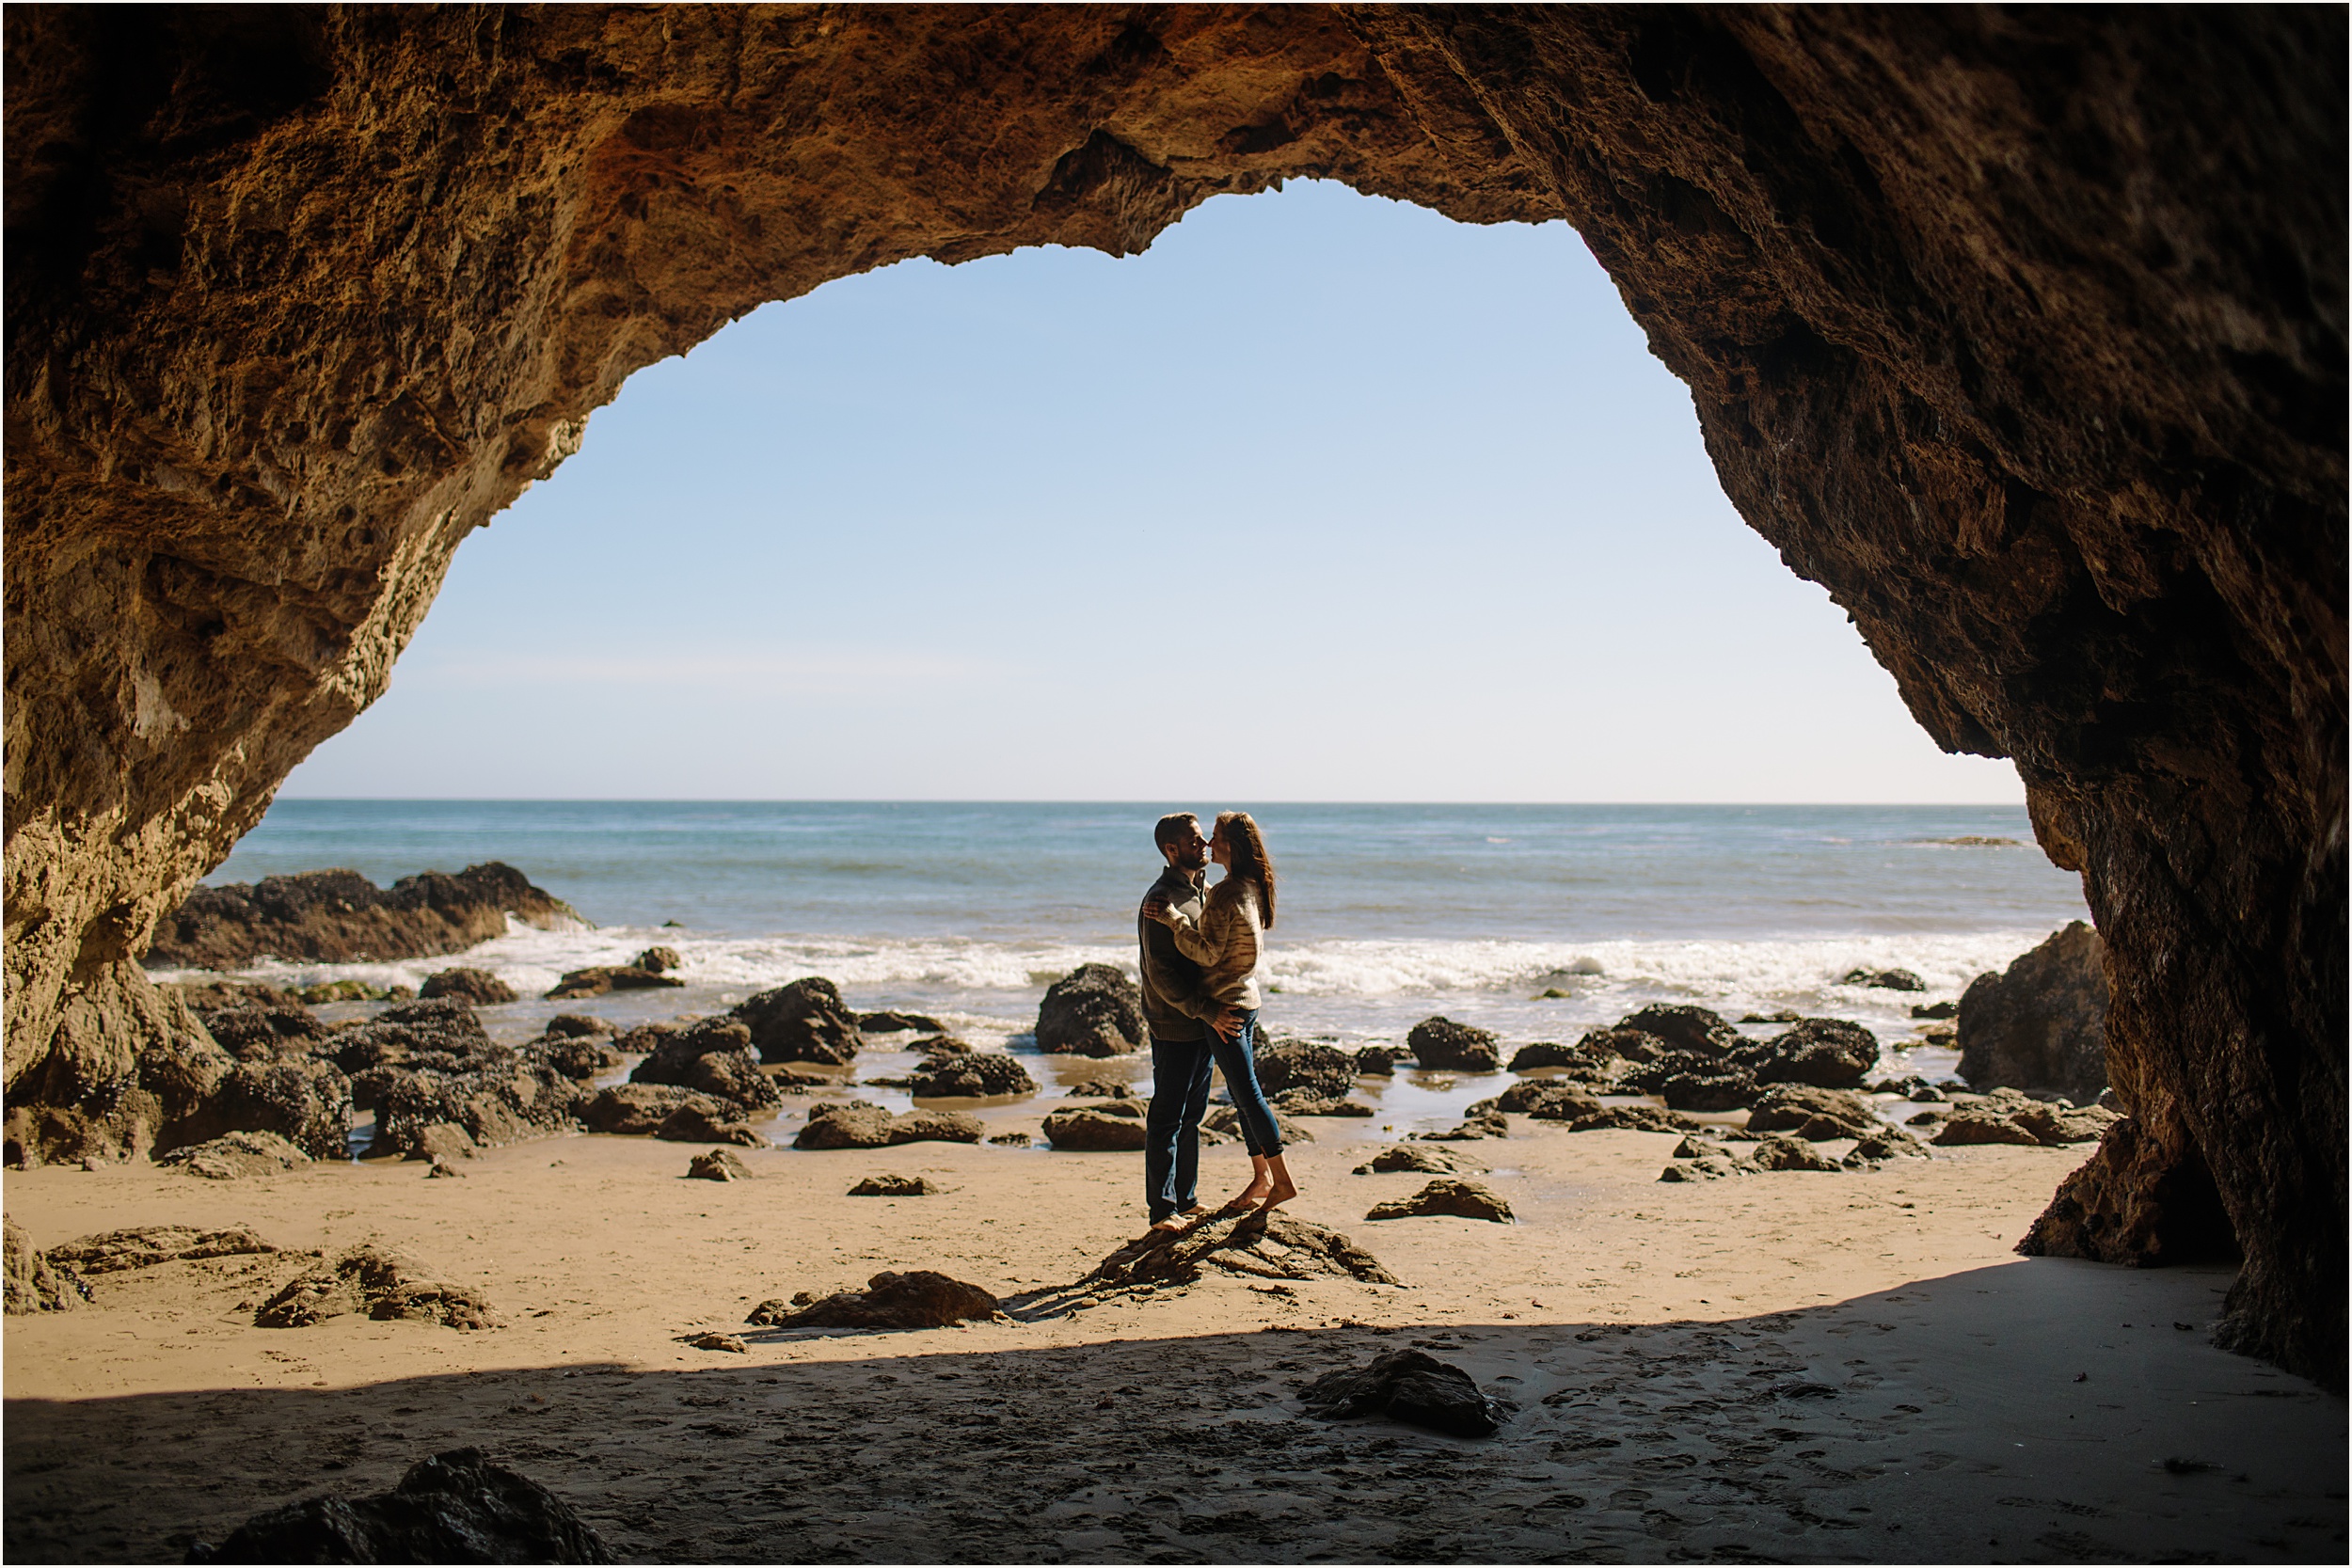 Nicole-and-Eric-Engagement-Session_0006 Candid & Dreamy Malibu Engagement Session in Sea Caves